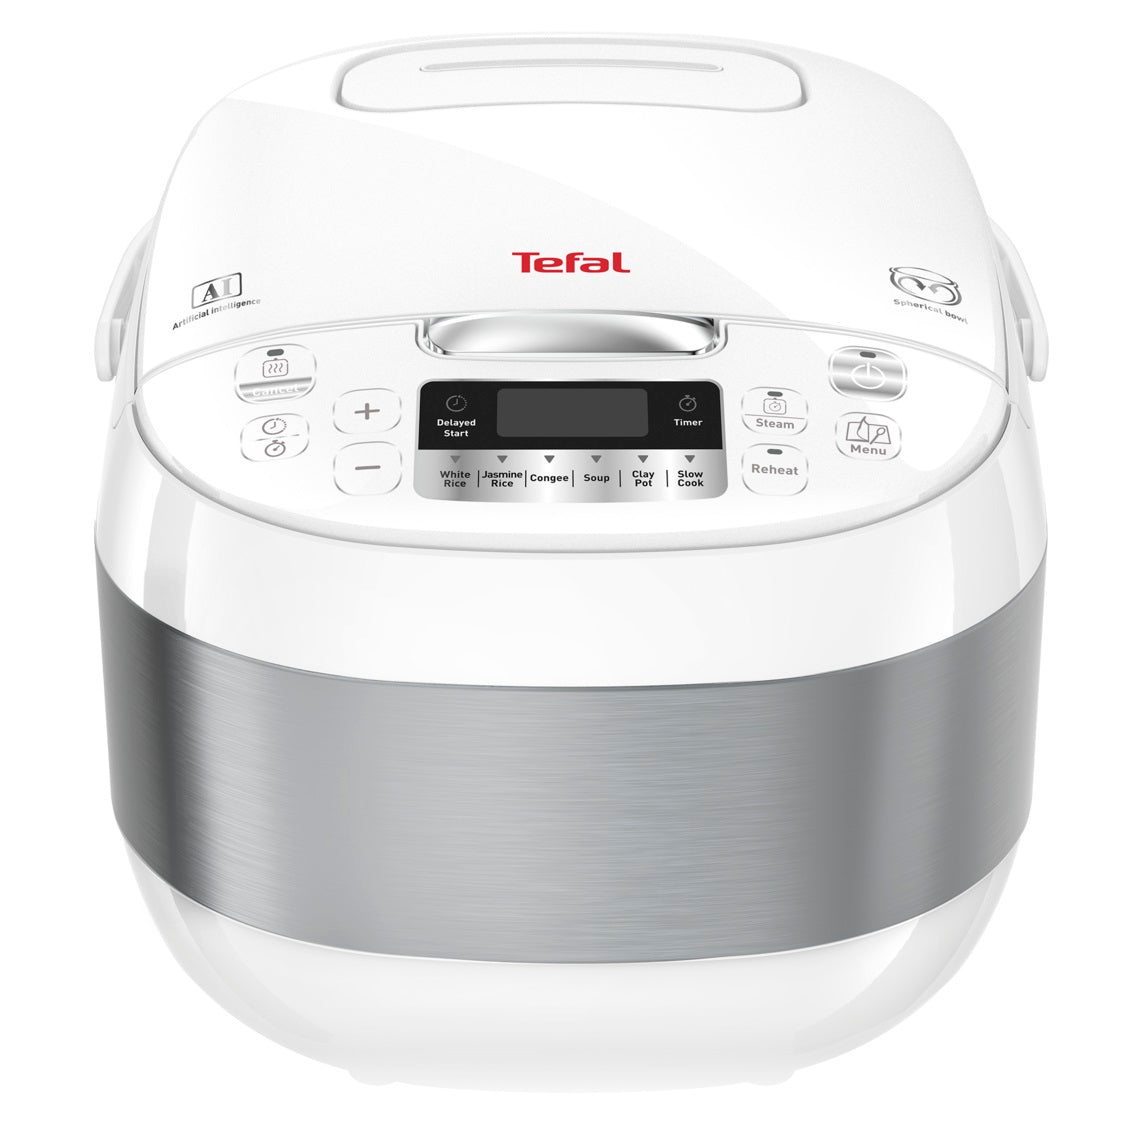 Tefal RK7521 Delirice Compact Rice Cooker 1.8L